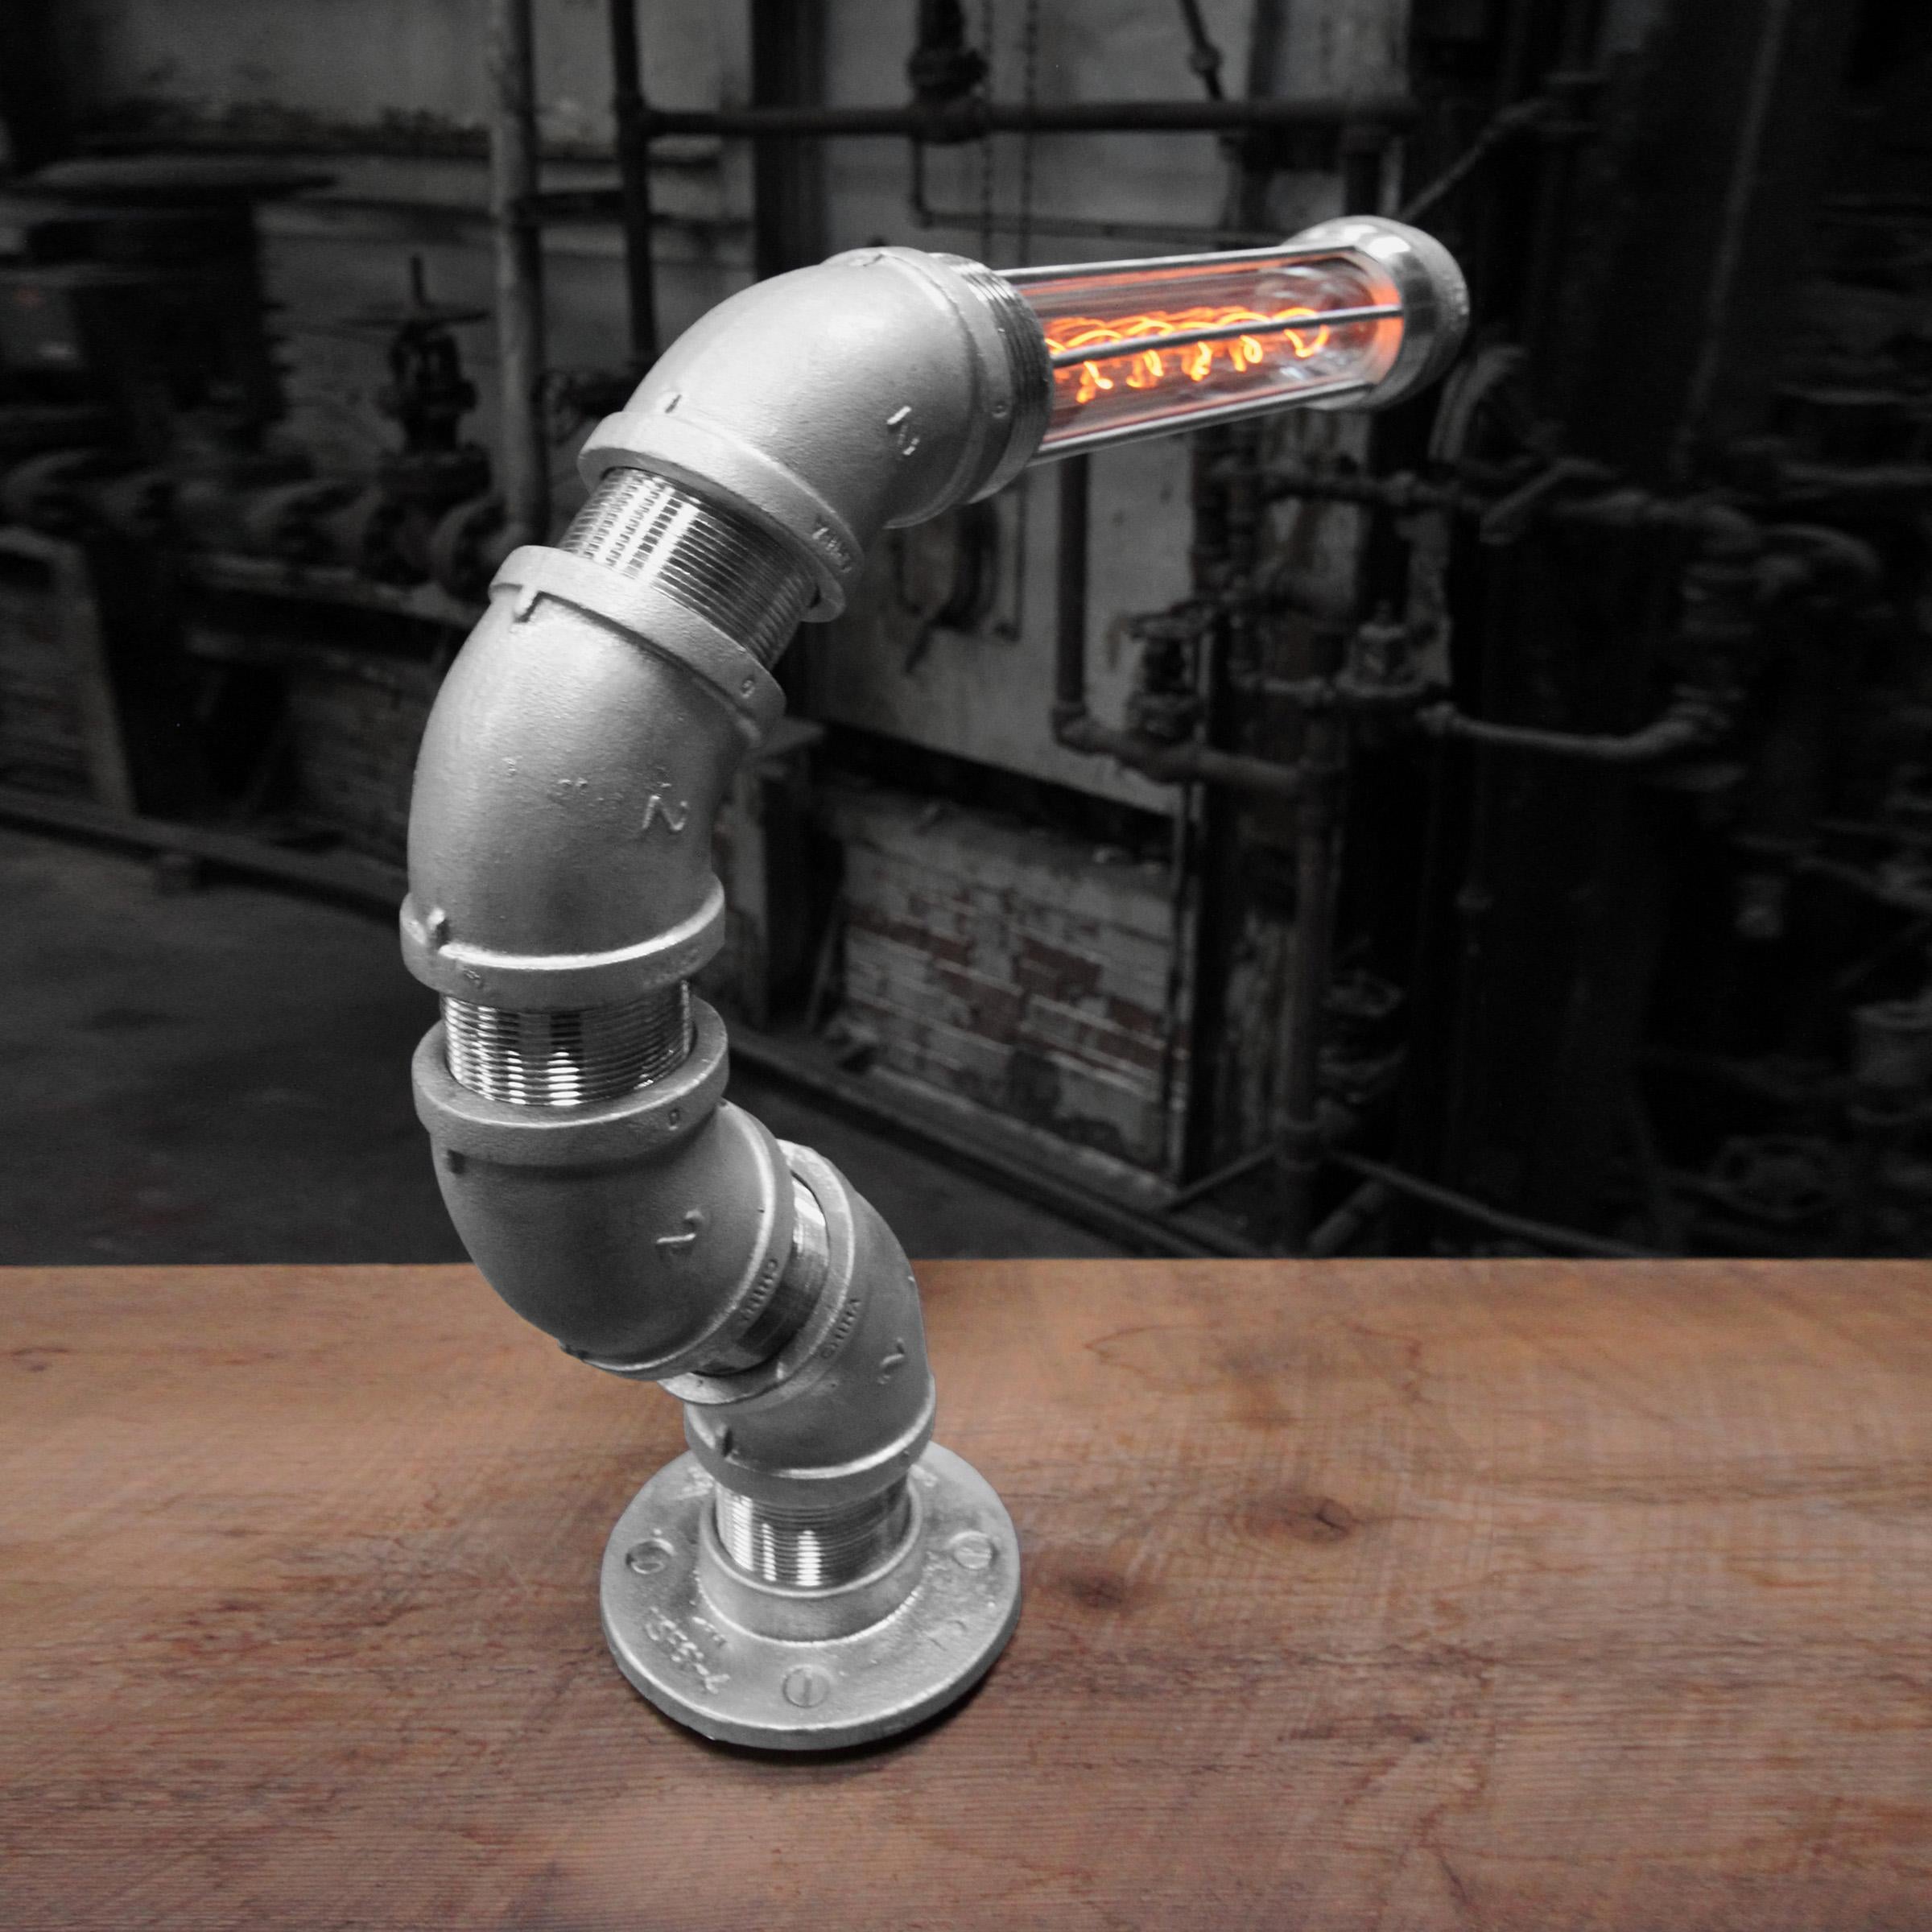 industrial style table lamps